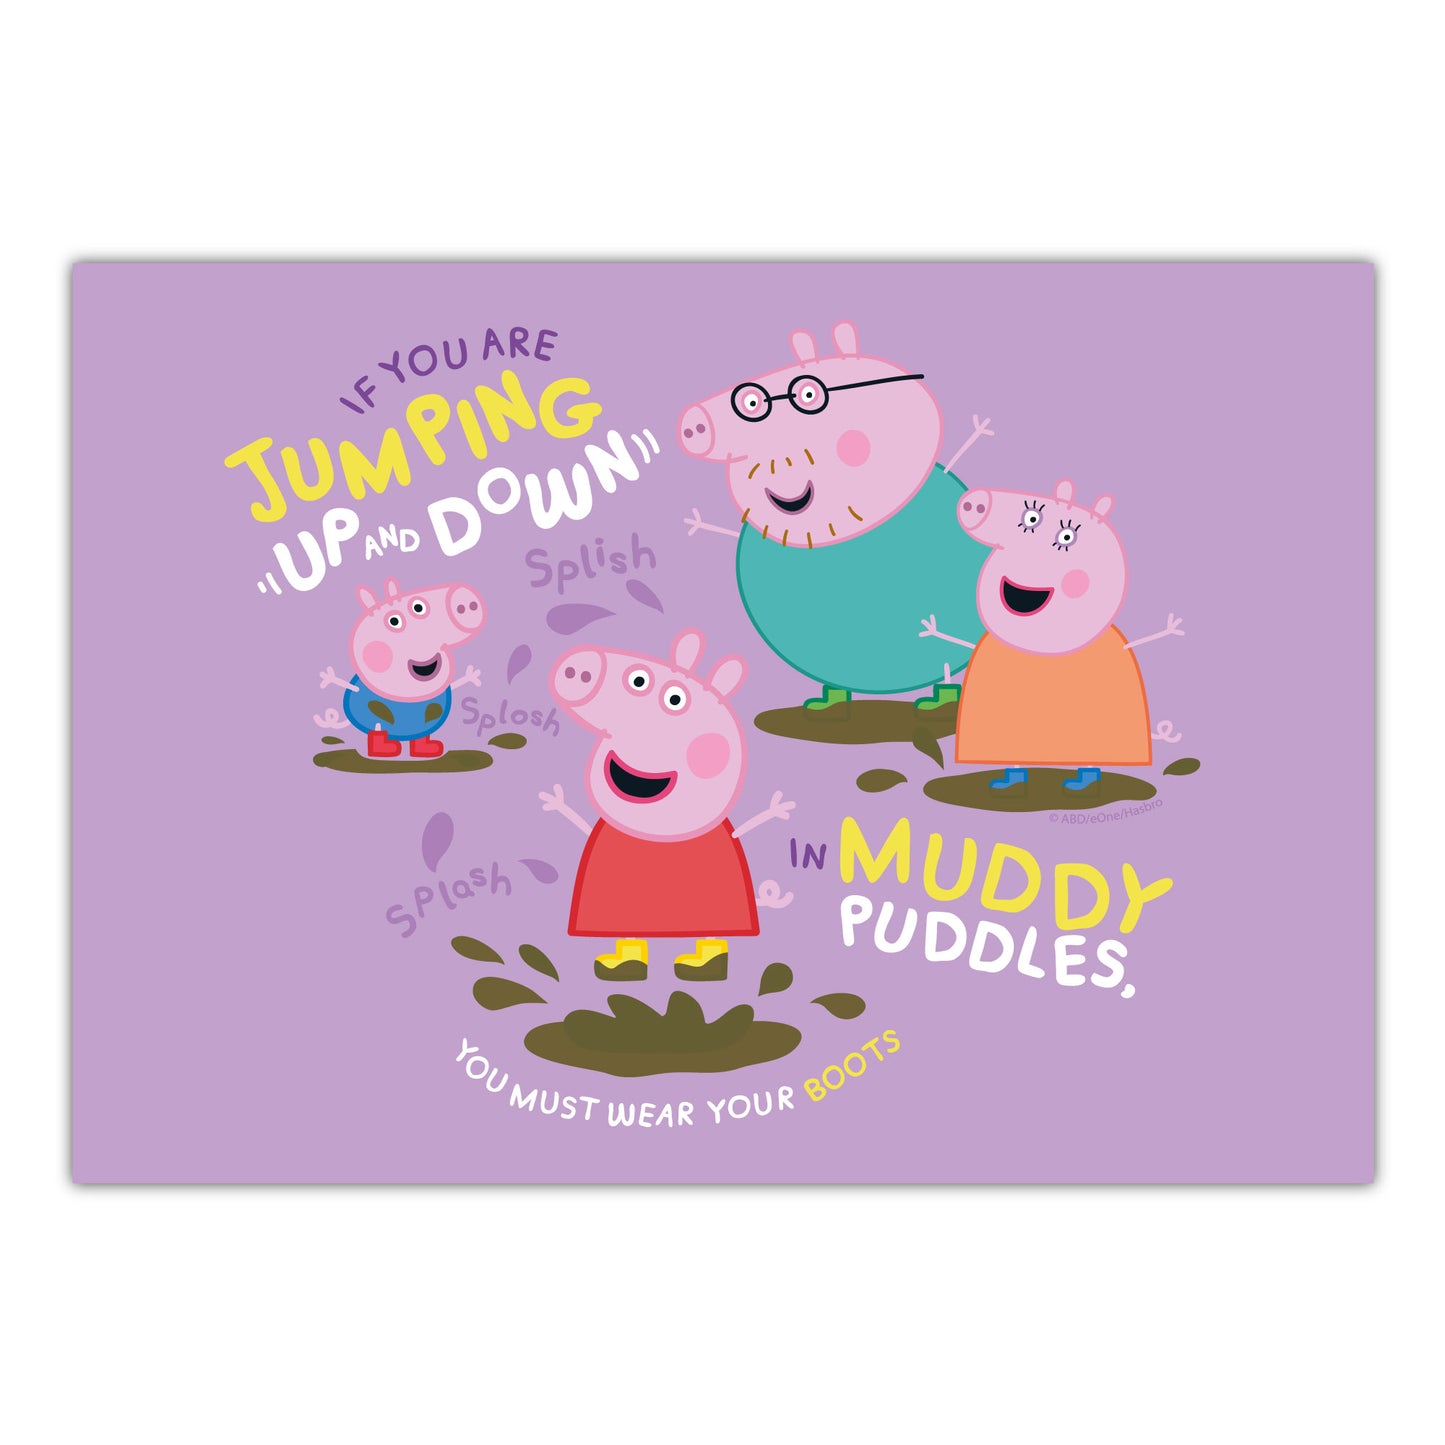 Peppa Pig Print - Peppa and Family Jumping in Muddy Puddles Poster Wall Art